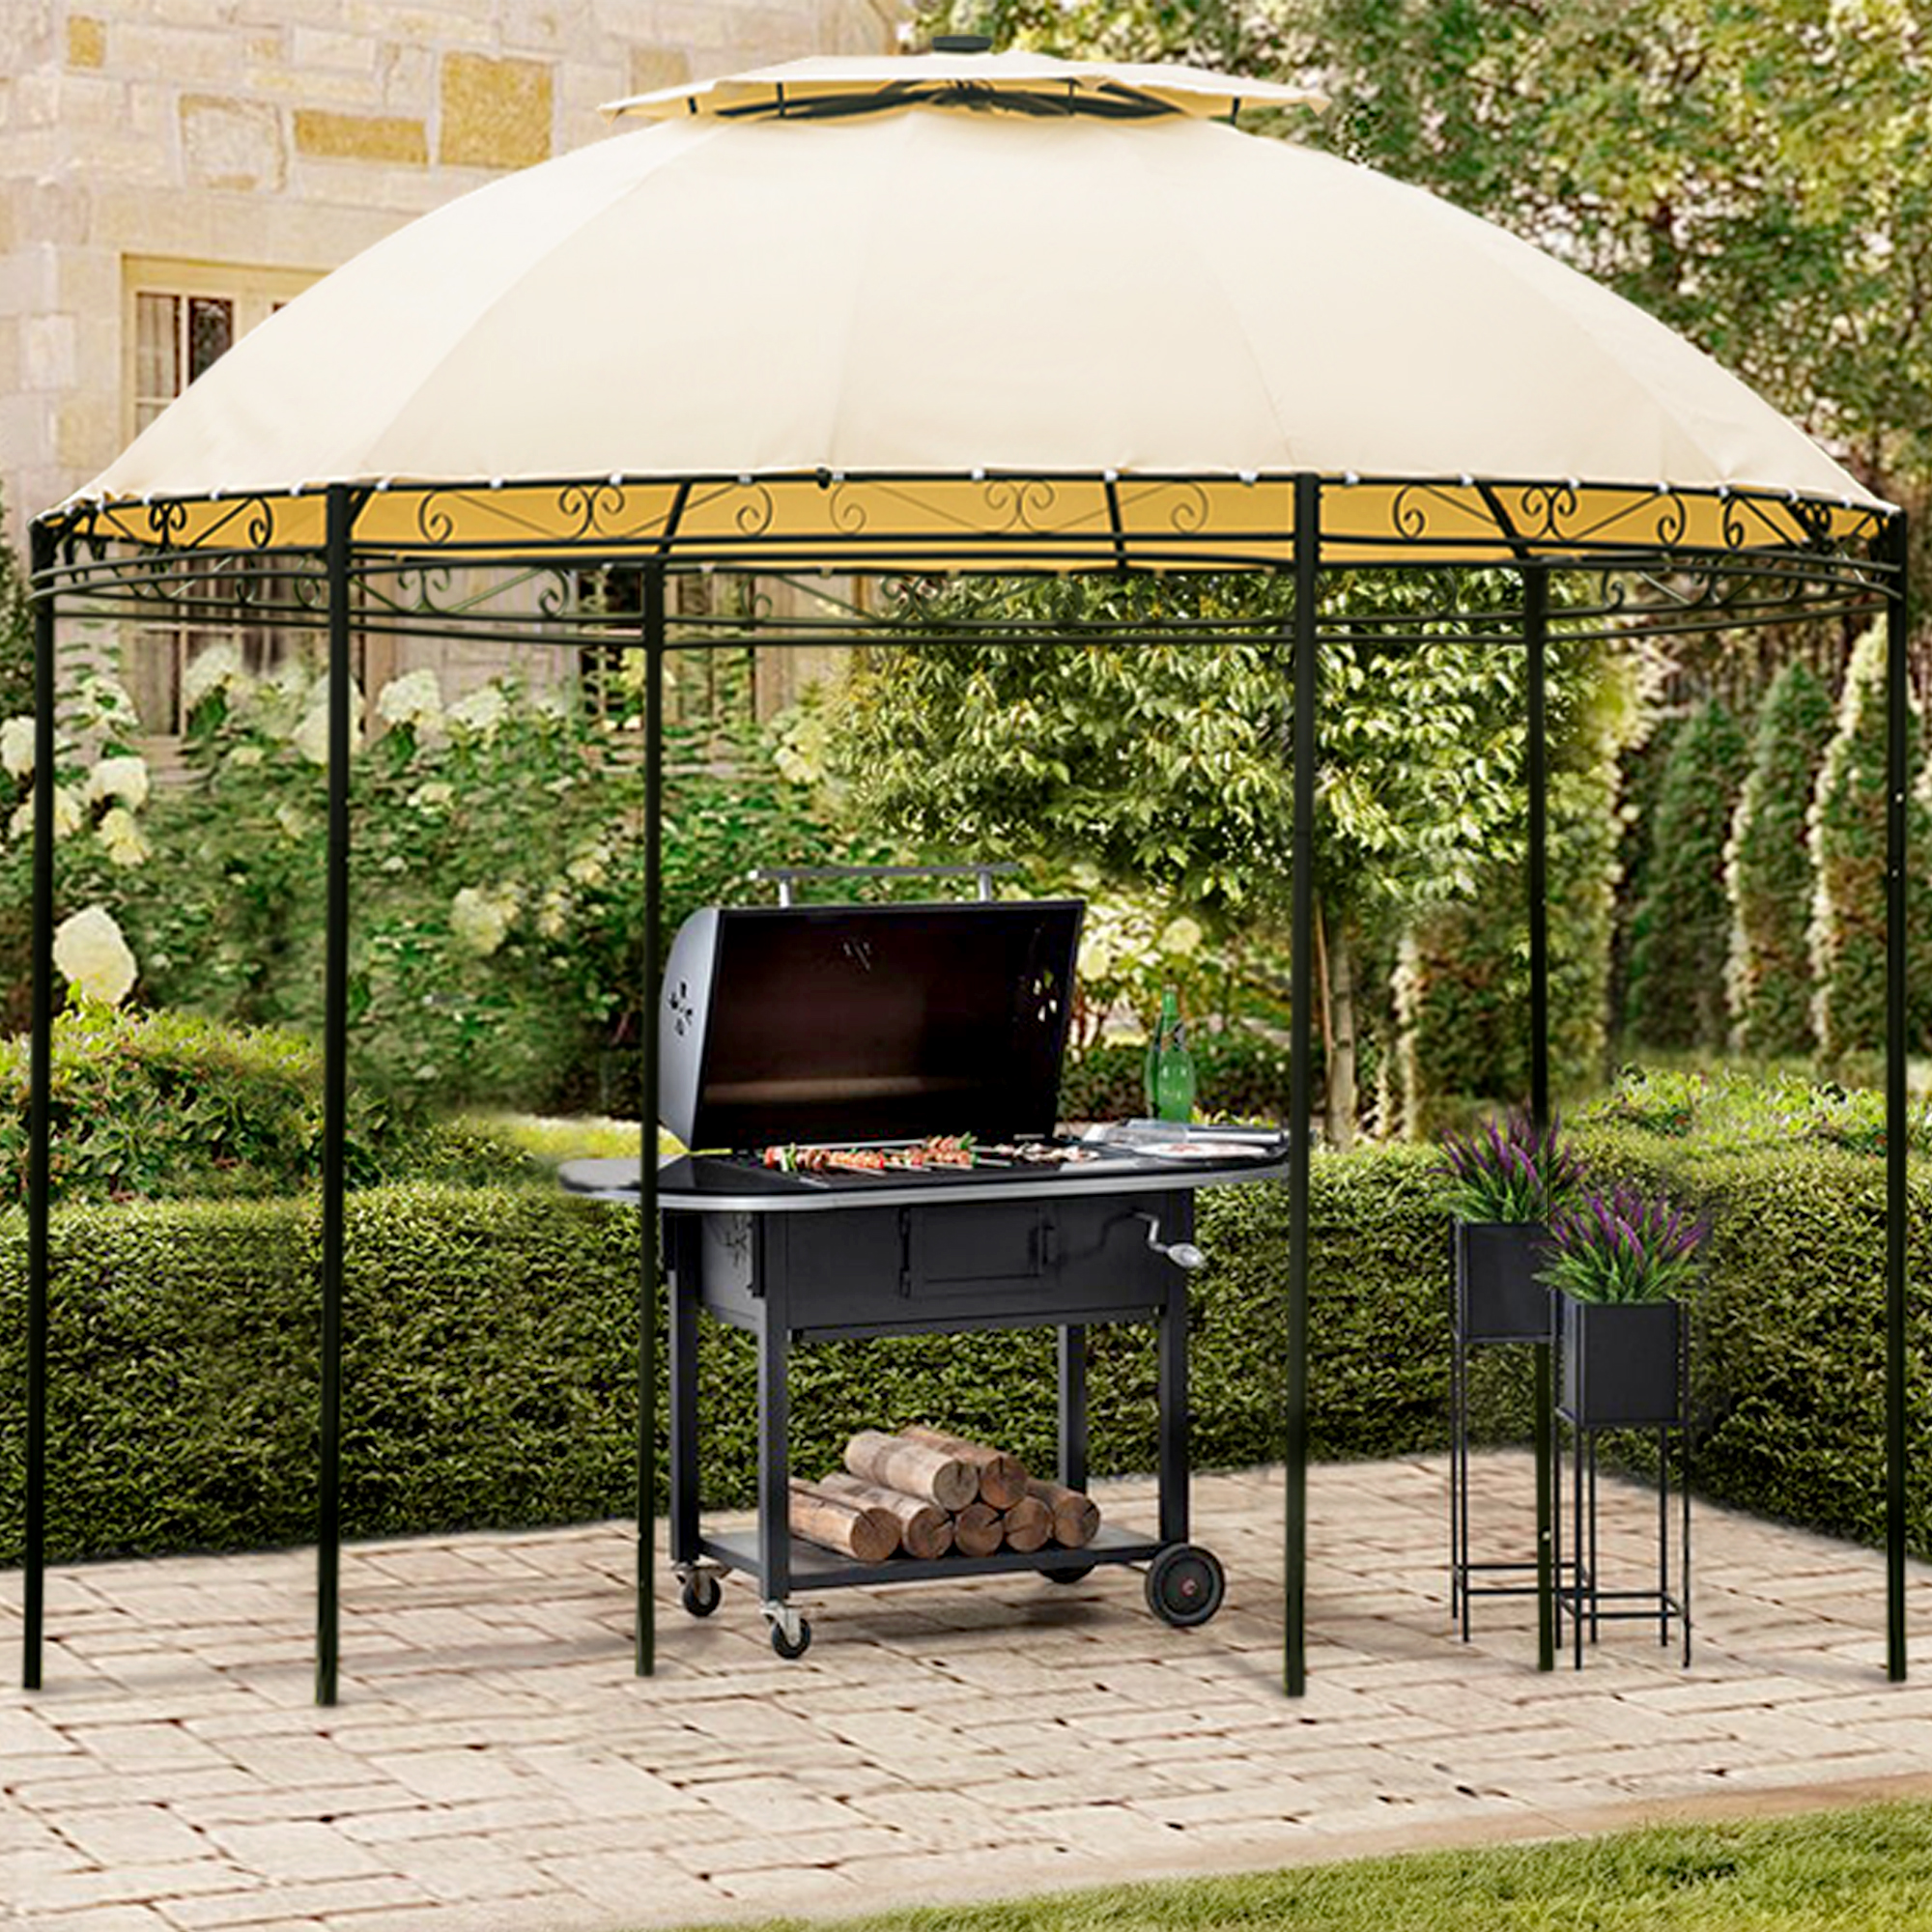 [VIDEO provided] U-style Outdoor Gazebo Steel Fabric Round Soft Top Gazebo，Outdoor Patio Dome Gazebo with Removable Curtains-CASAINC